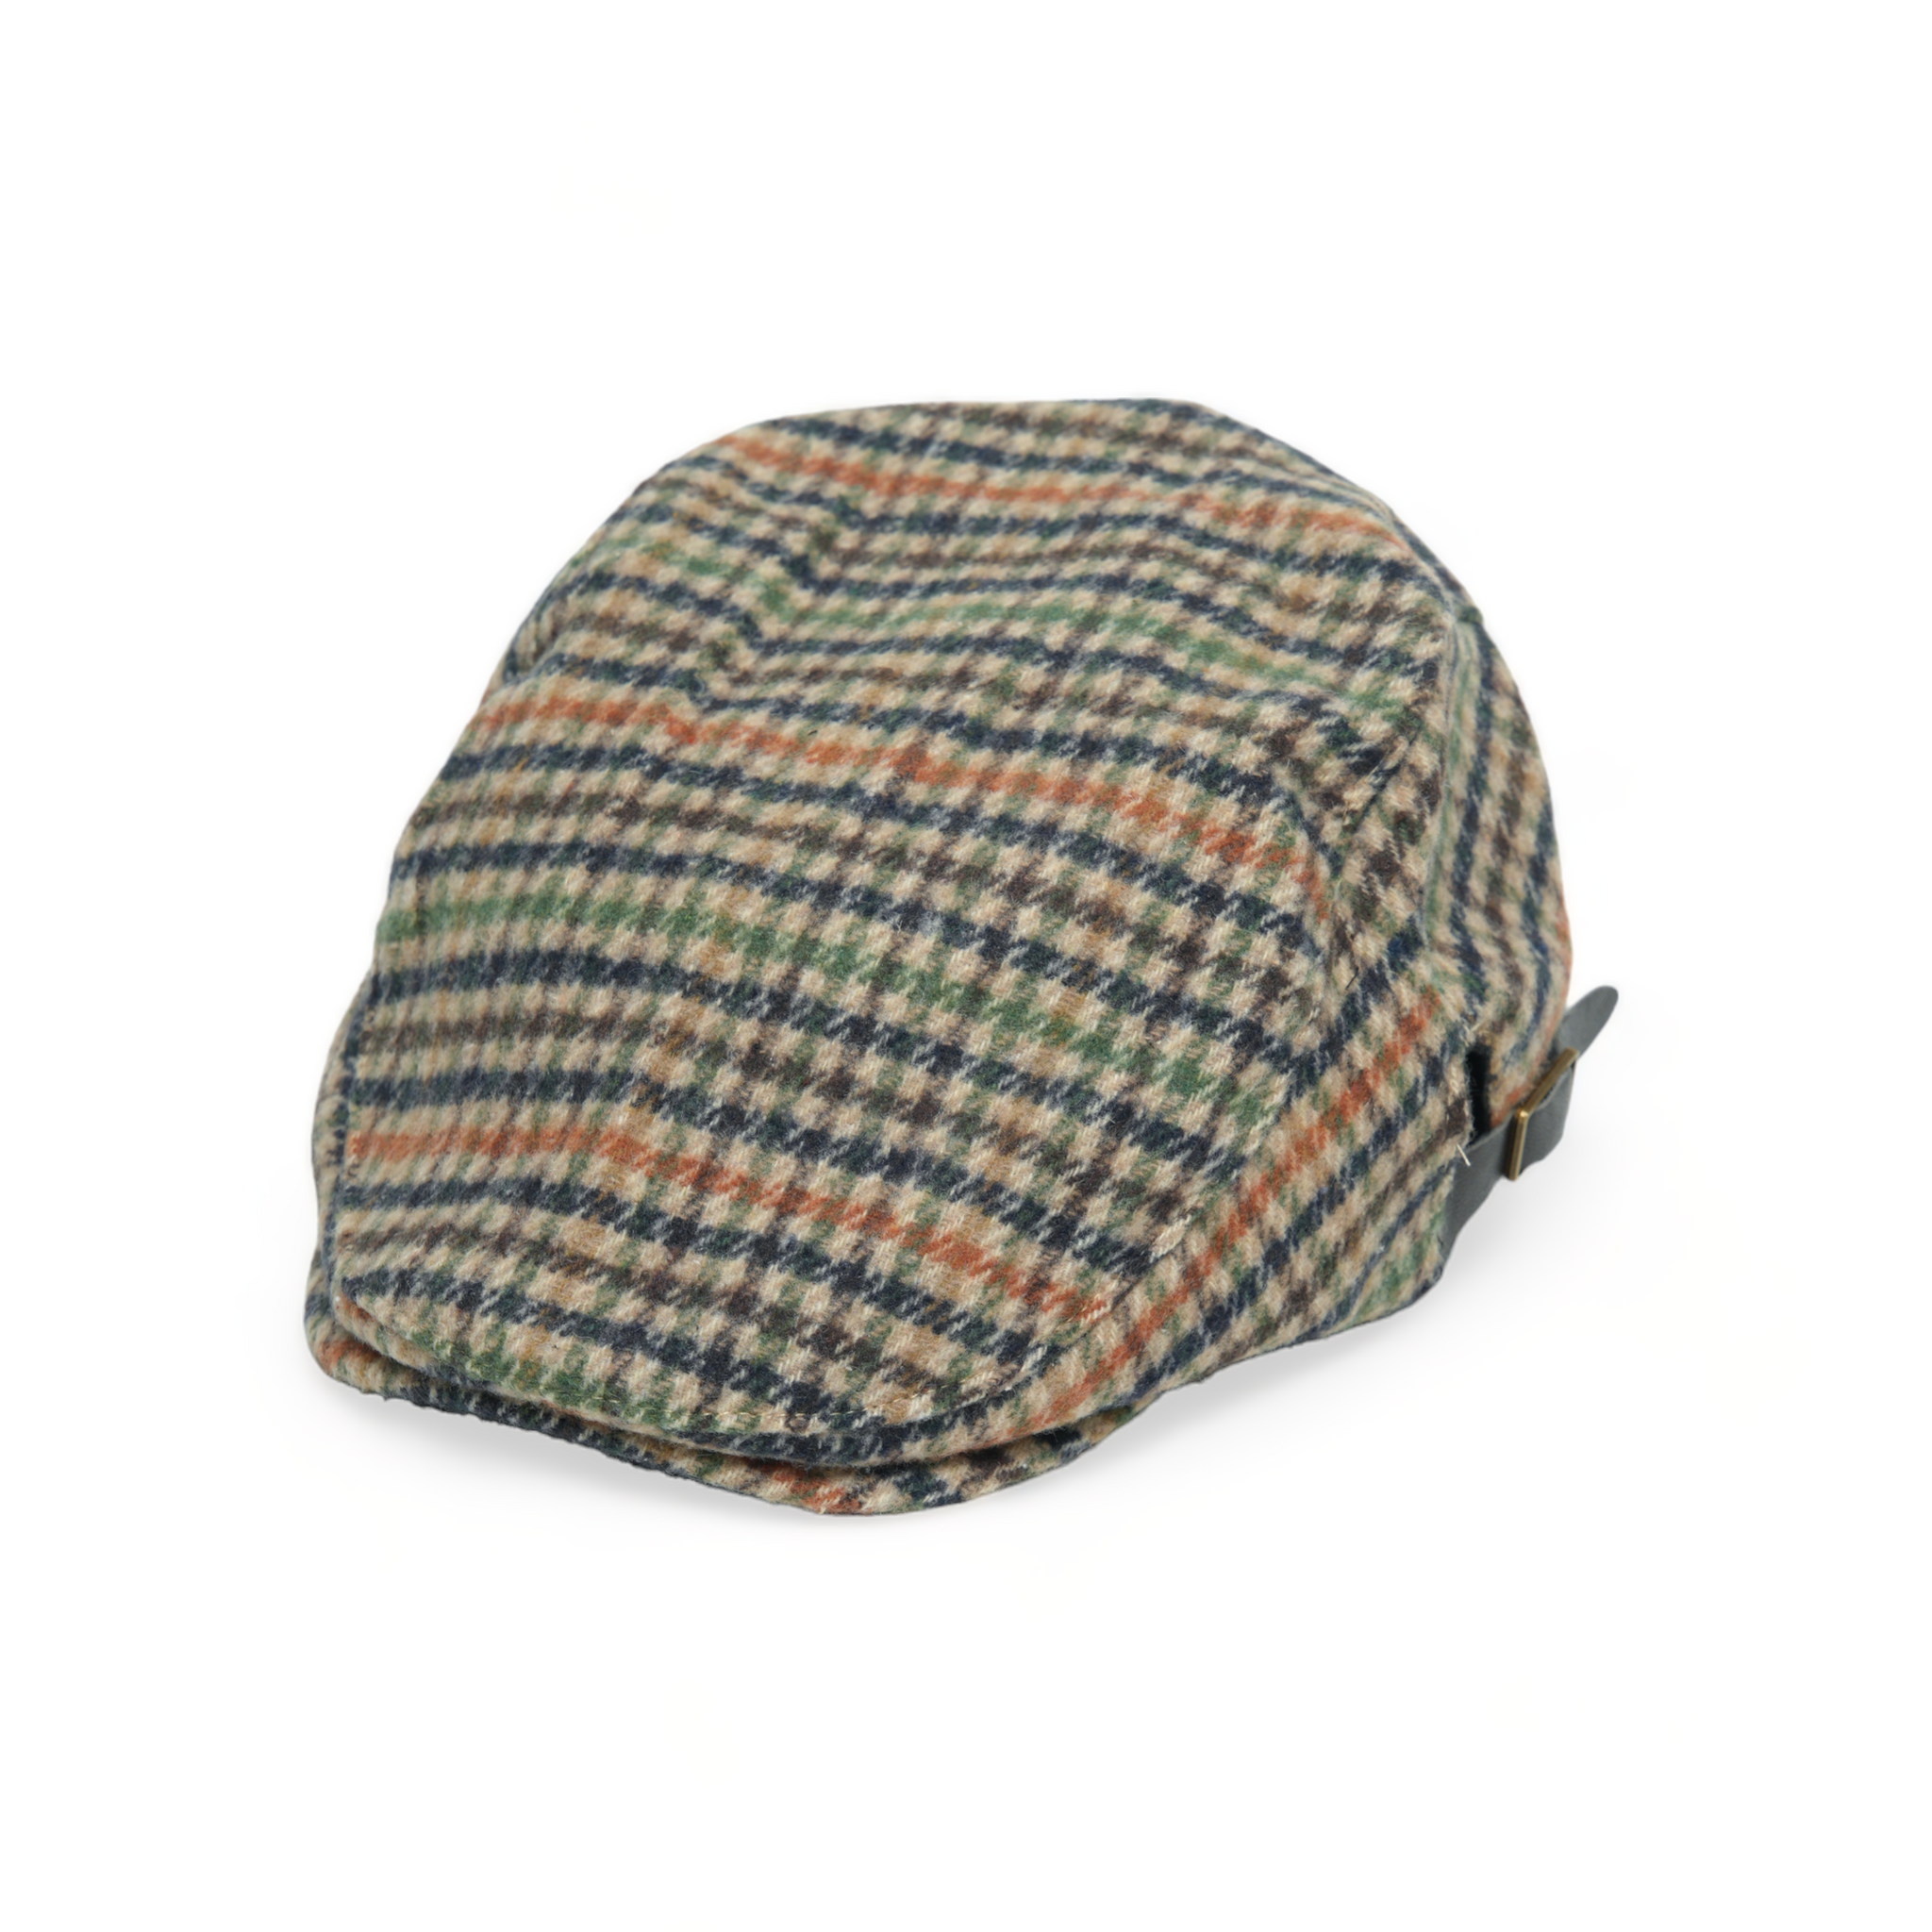 Chokore Houndstooth Ivy Cap with Adjustable Buckle (Blue)